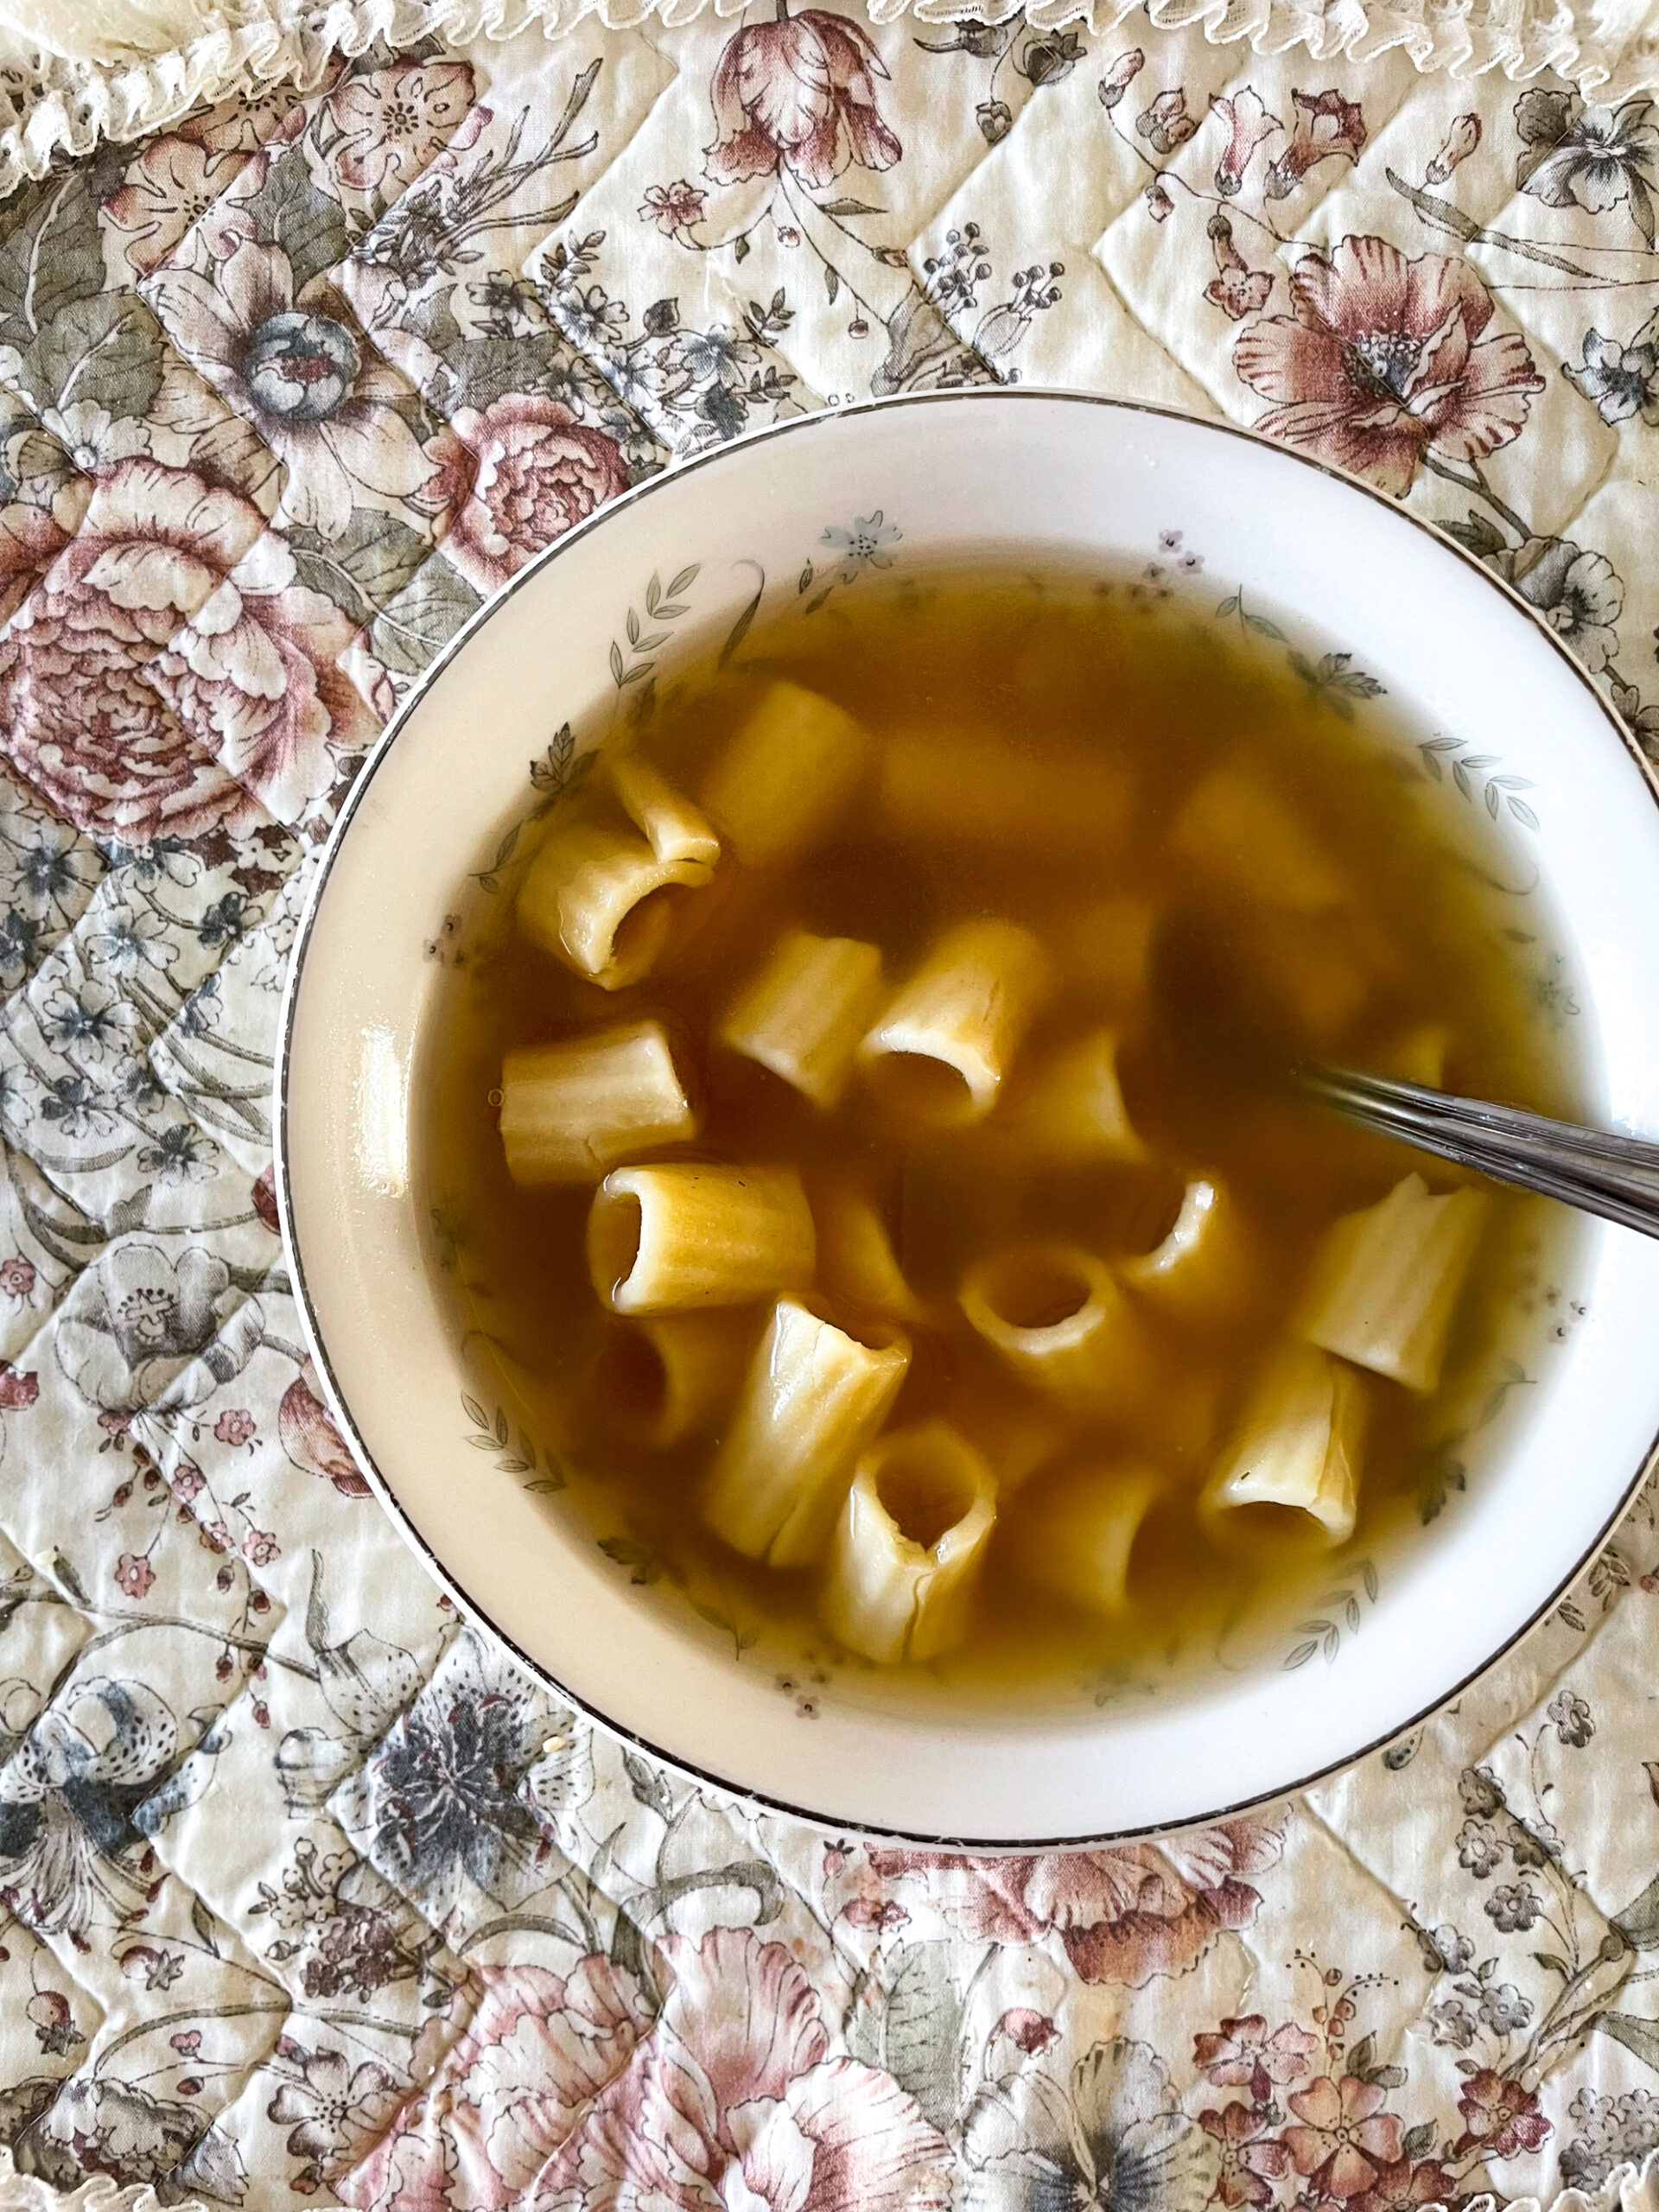 homemade soup in a bowl with noodles.